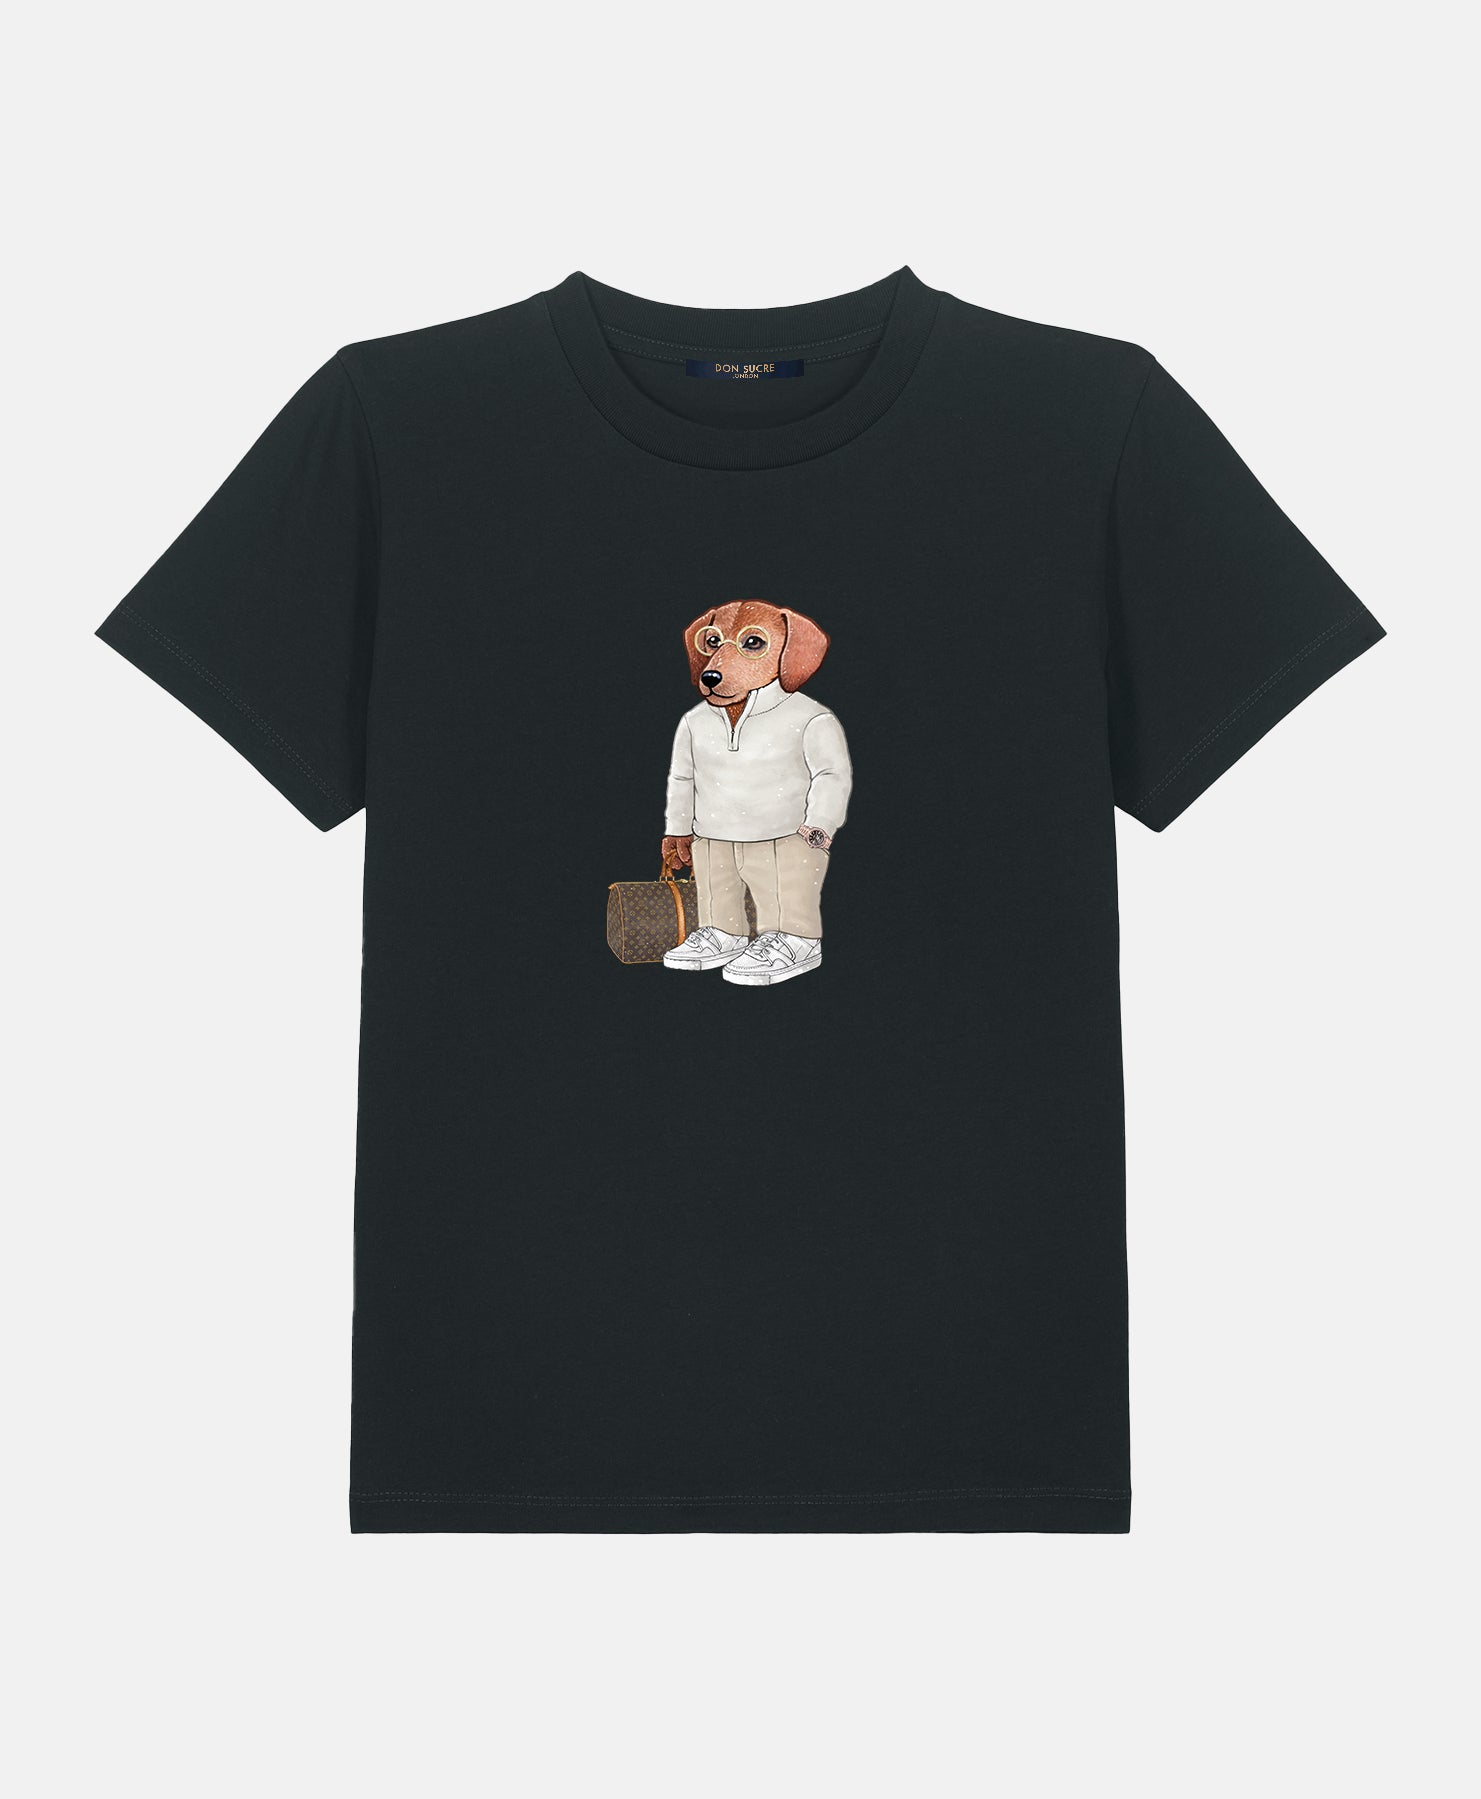 Doxie "Top Dog" T-Shirt Kids